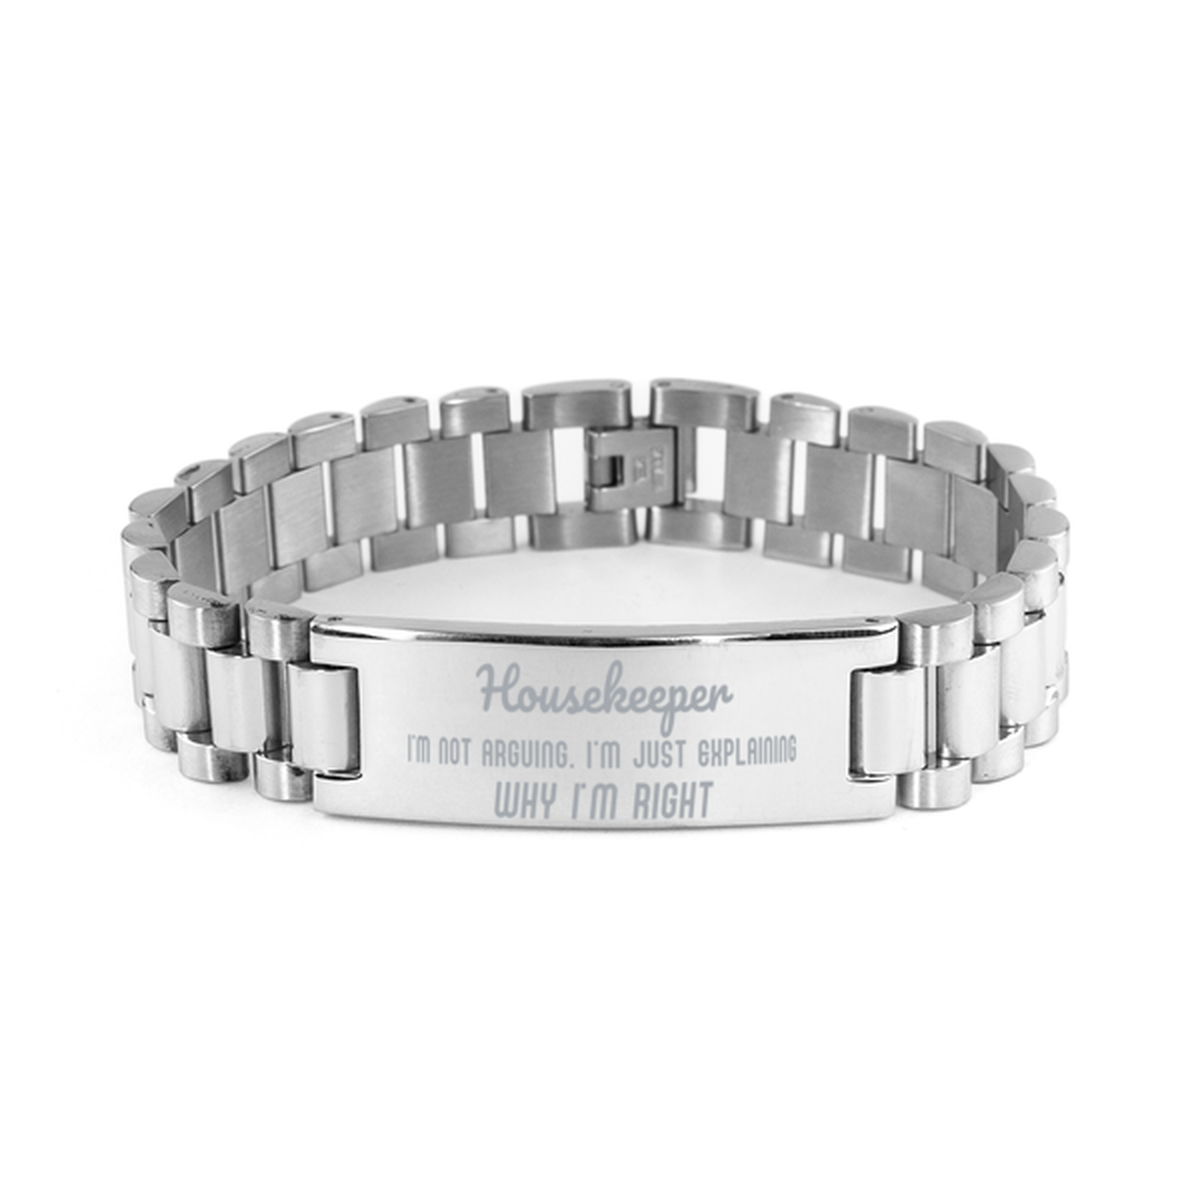 Housekeeper I'm not Arguing. I'm Just Explaining Why I'm RIGHT Ladder Stainless Steel Bracelet, Graduation Birthday Christmas Housekeeper Gifts For Housekeeper Funny Saying Quote Present for Men Women Coworker